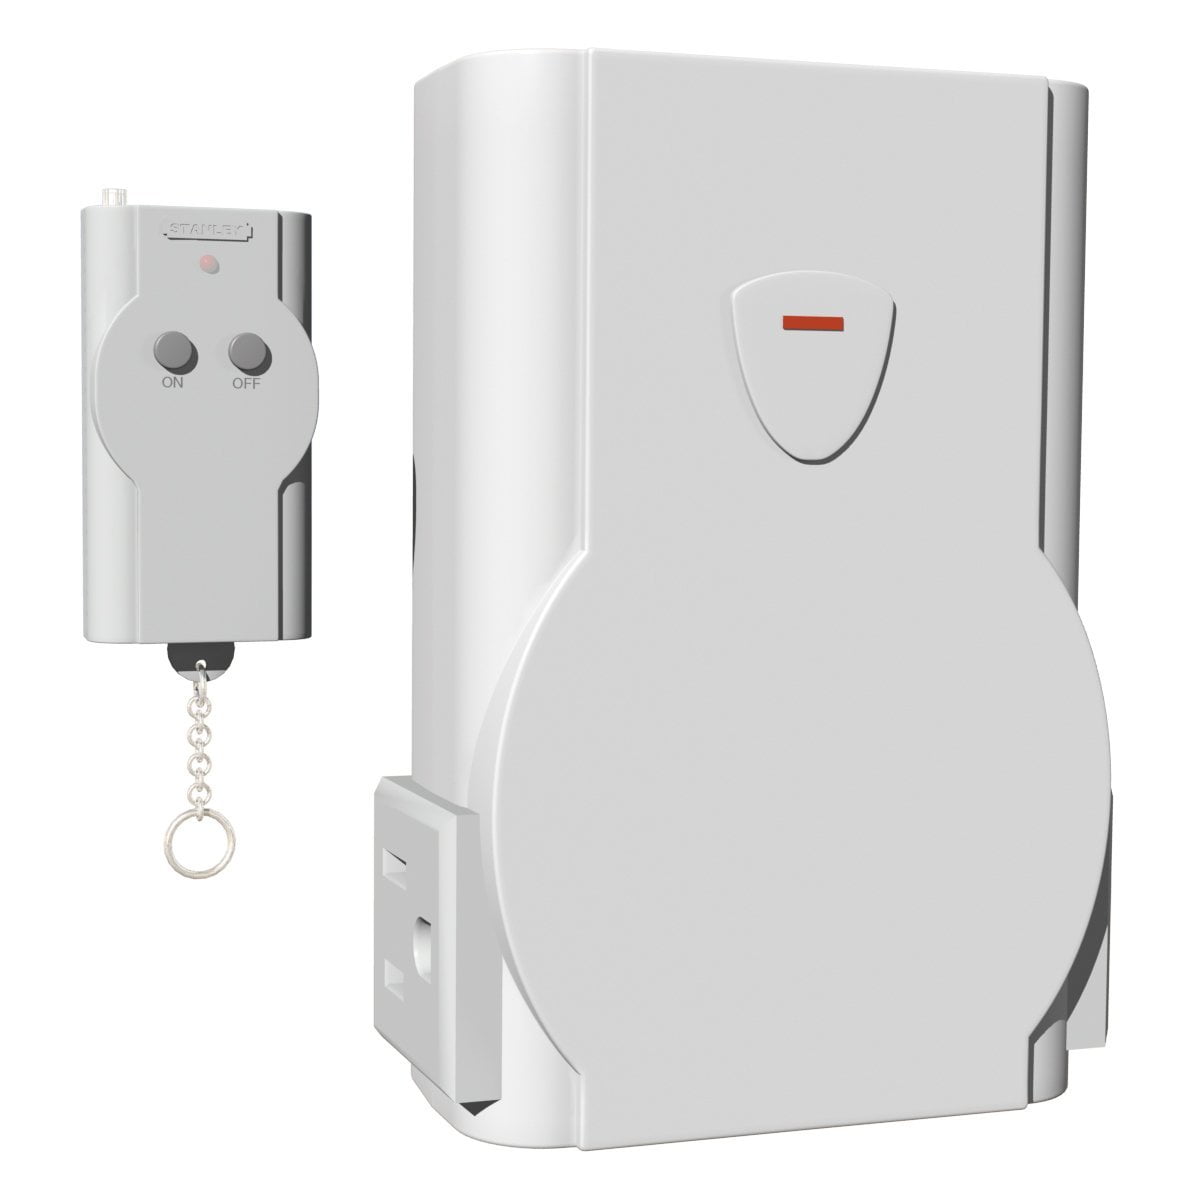 HBN Outdoor Indoor Wireless Remote Control 3-Prong Outlet